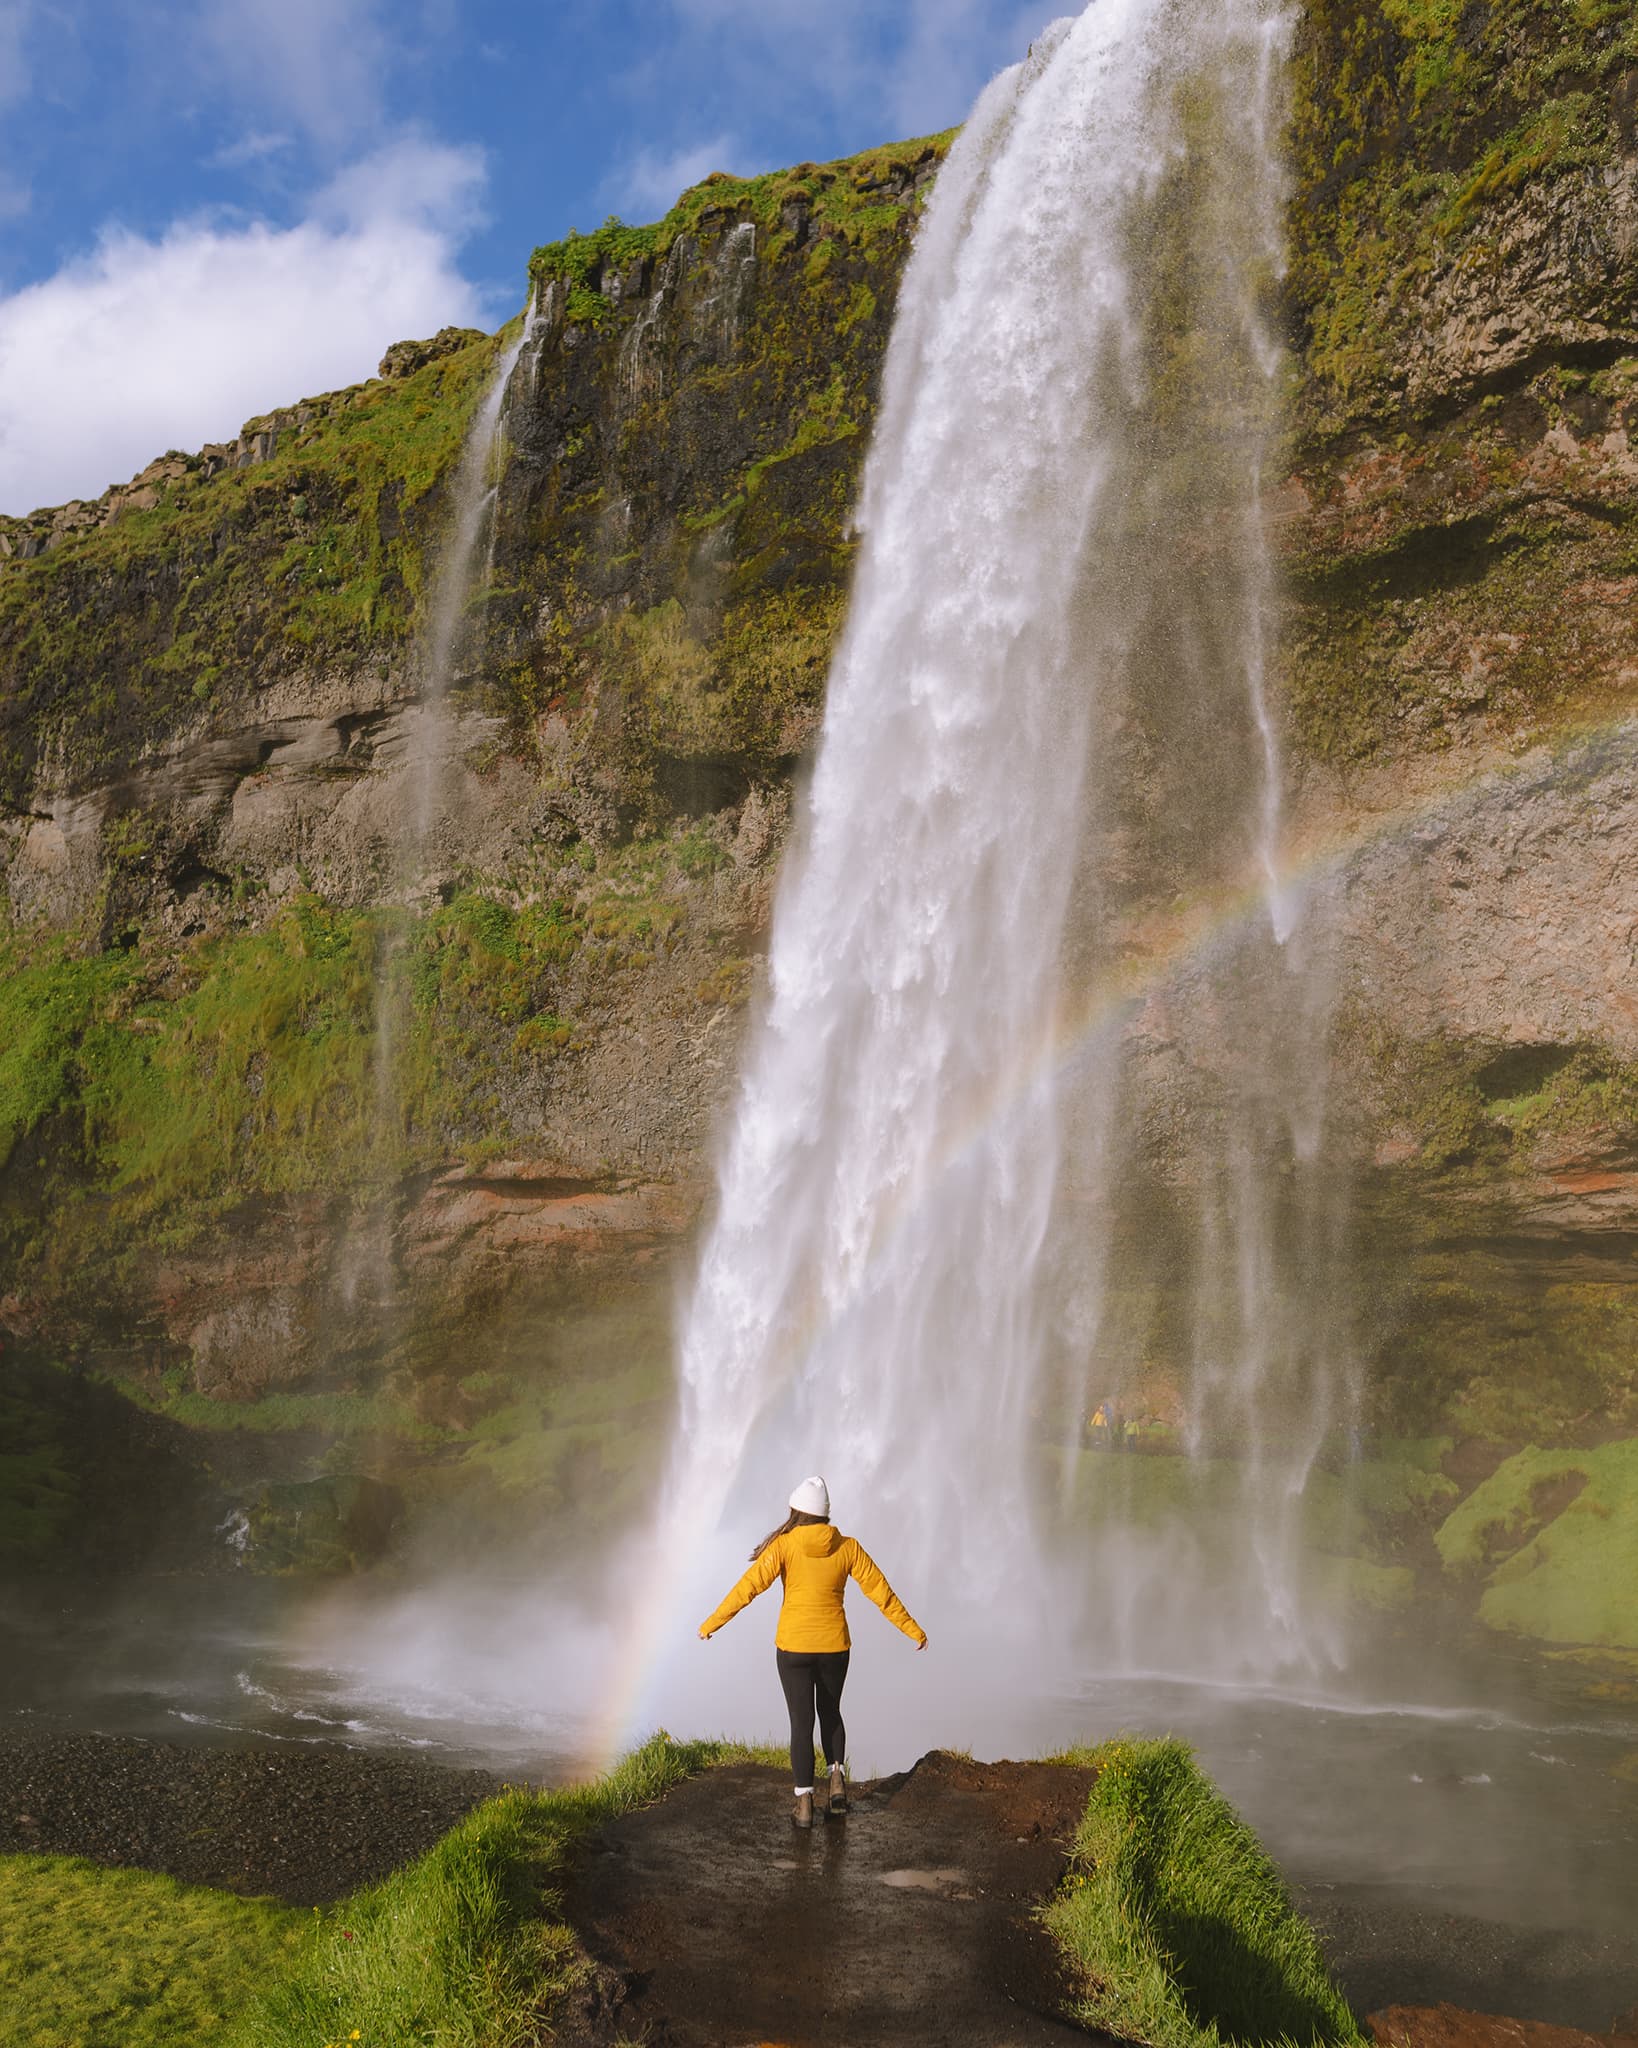 Girl in yellow jacket standing in front of a waterfall.